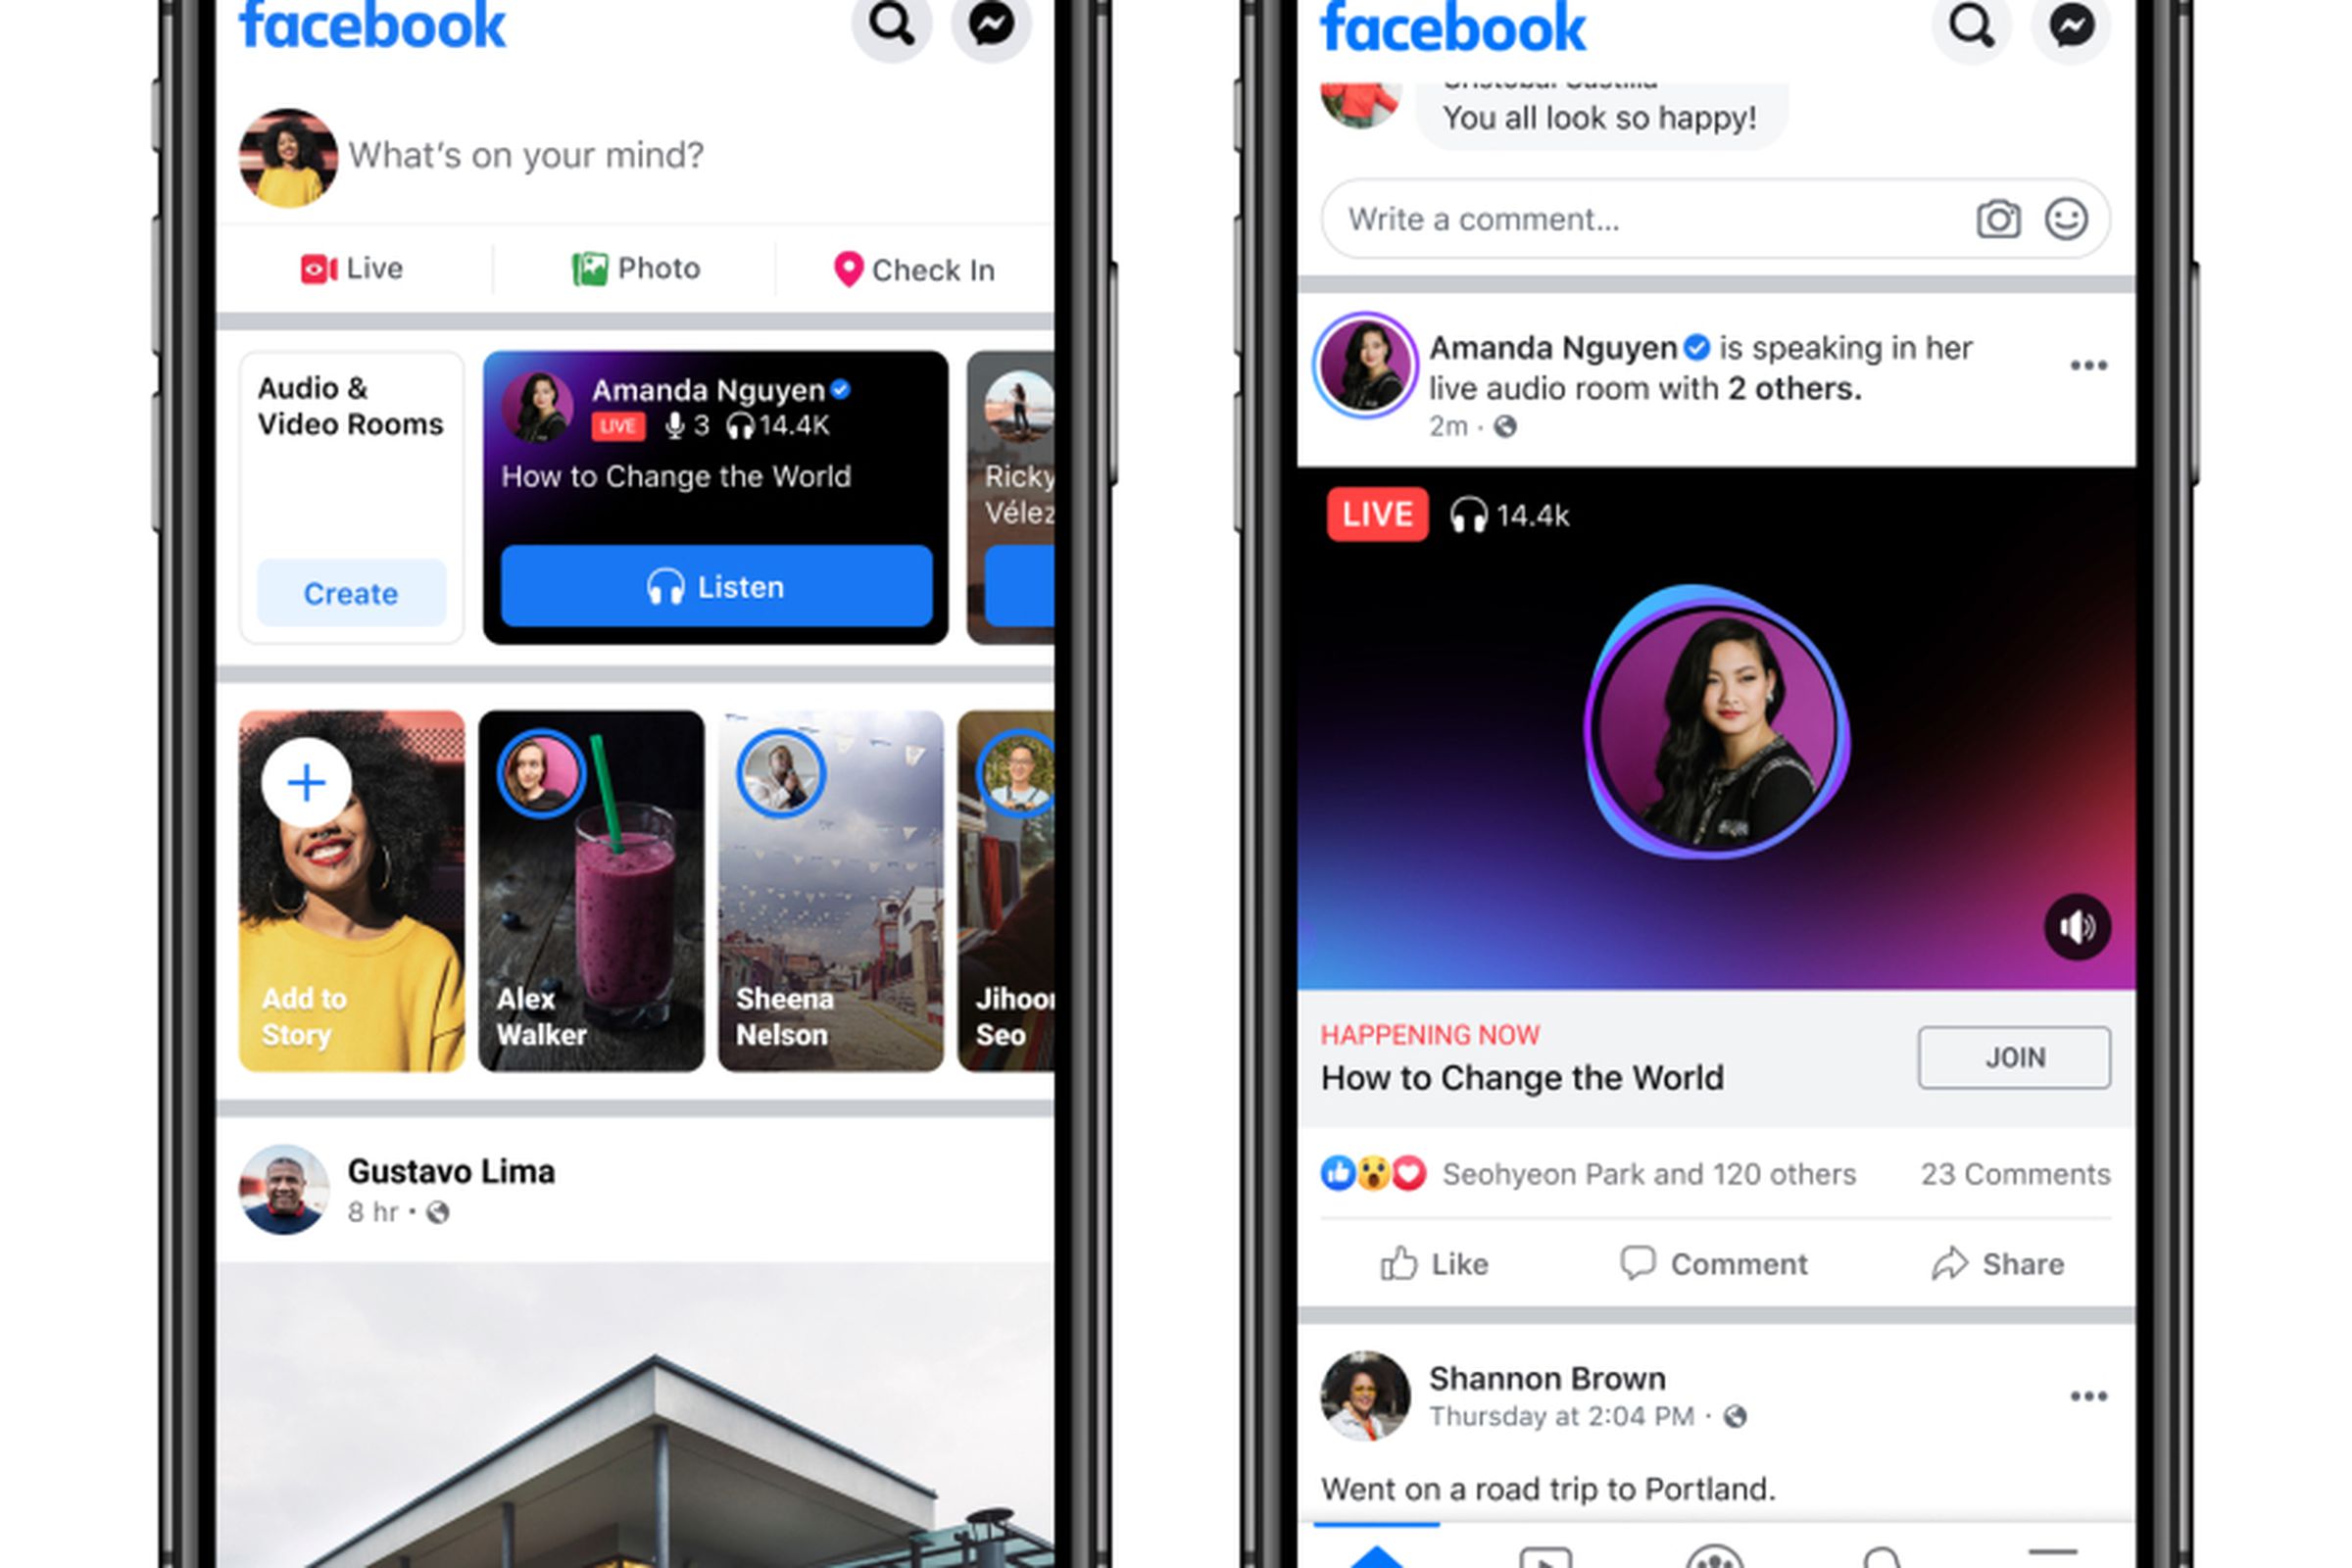 Facebook’s Live Audio rooms feature is expanding globally